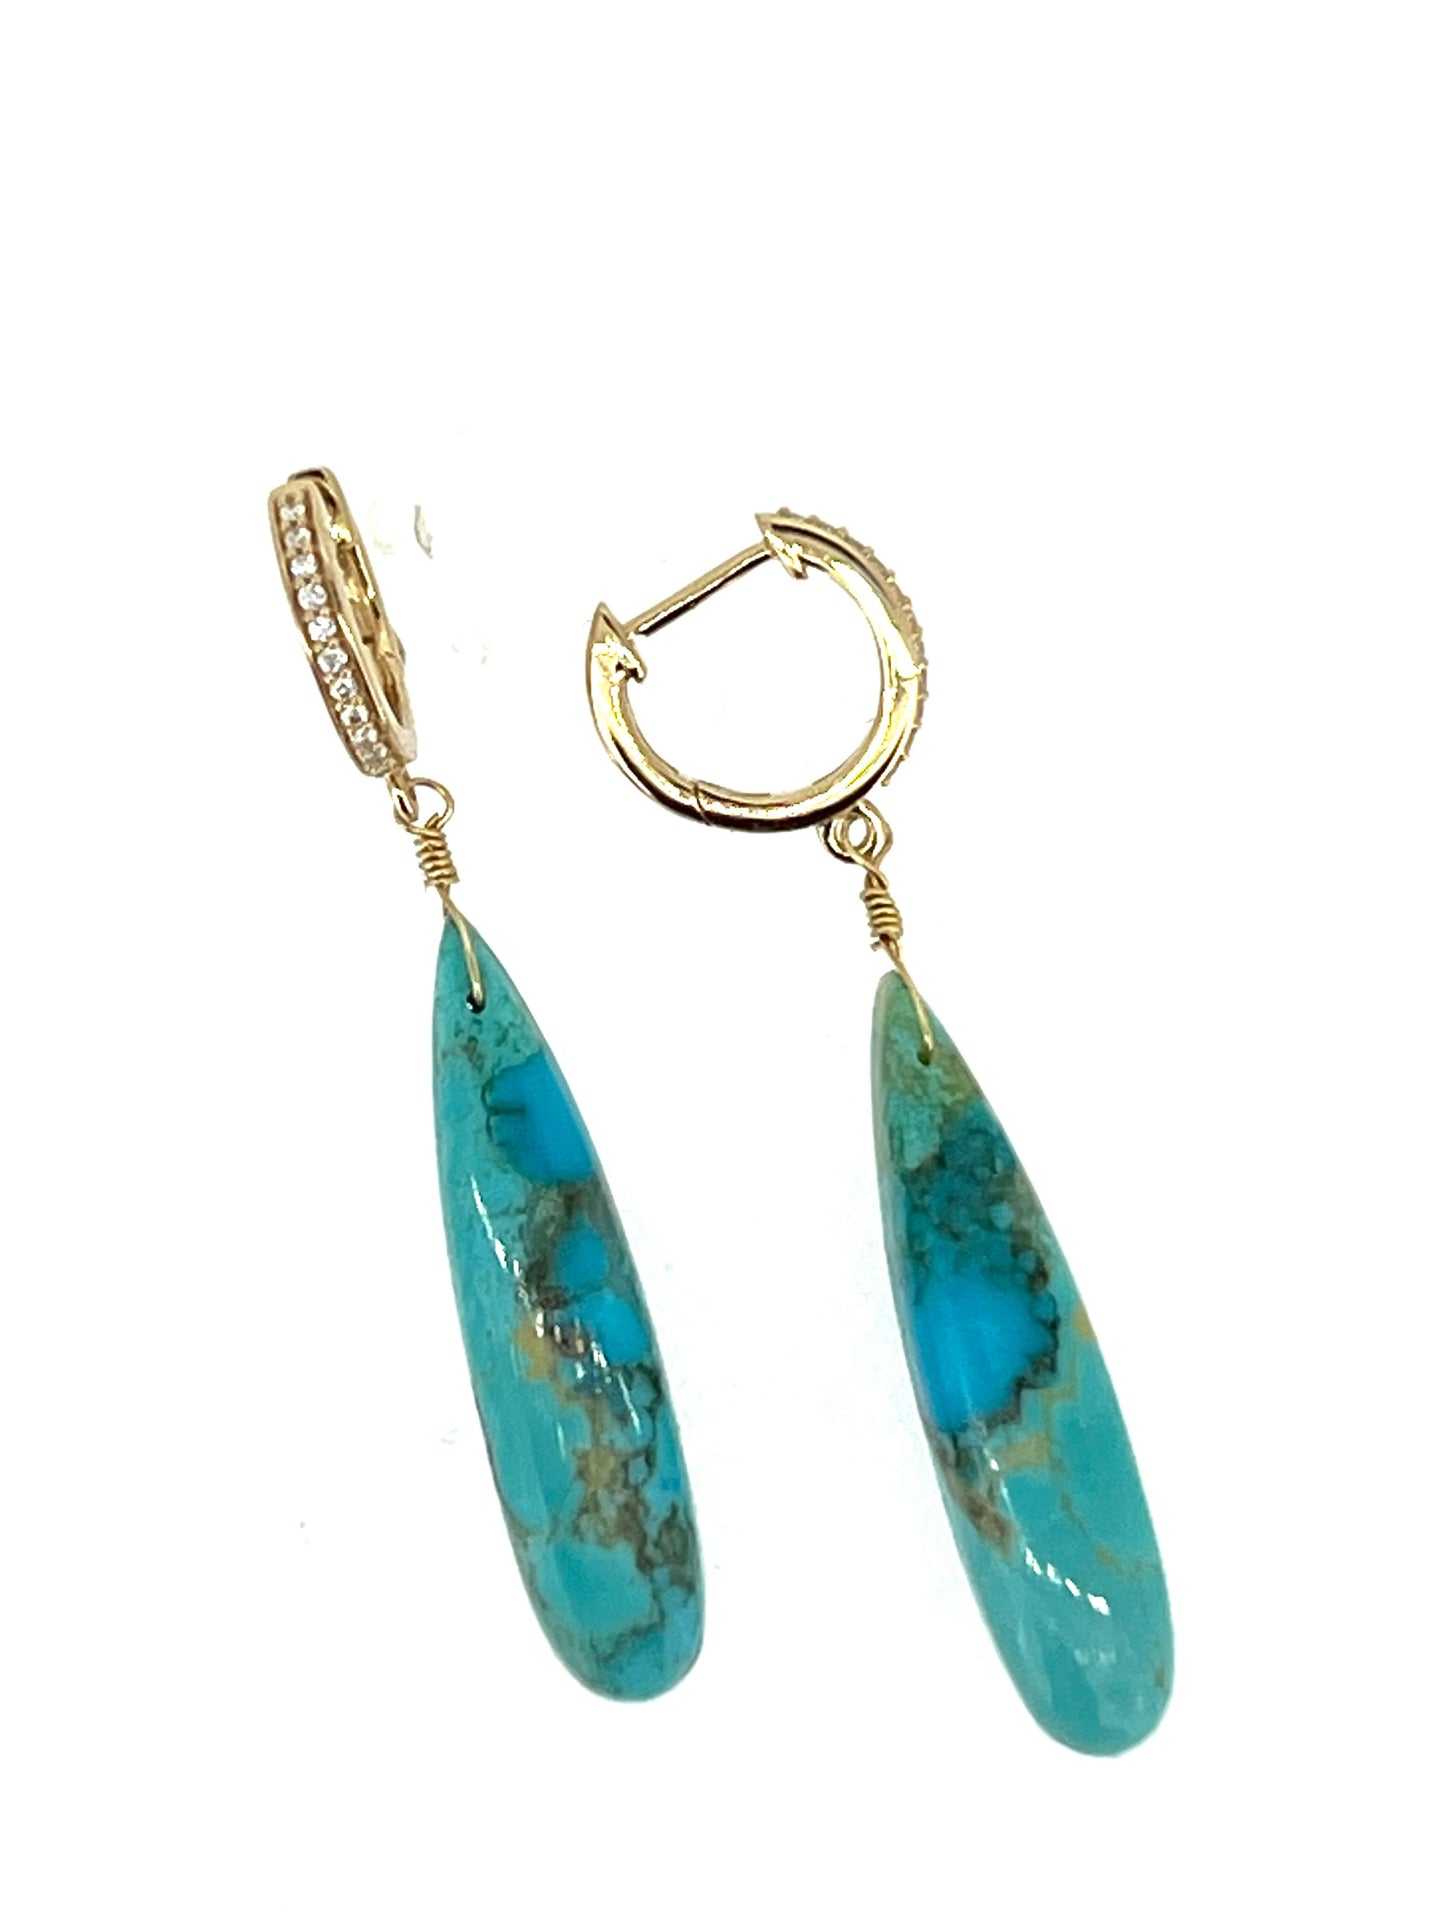 Sleeping Beauty Turquoise earring drops in 14KY gold and diamond hoops